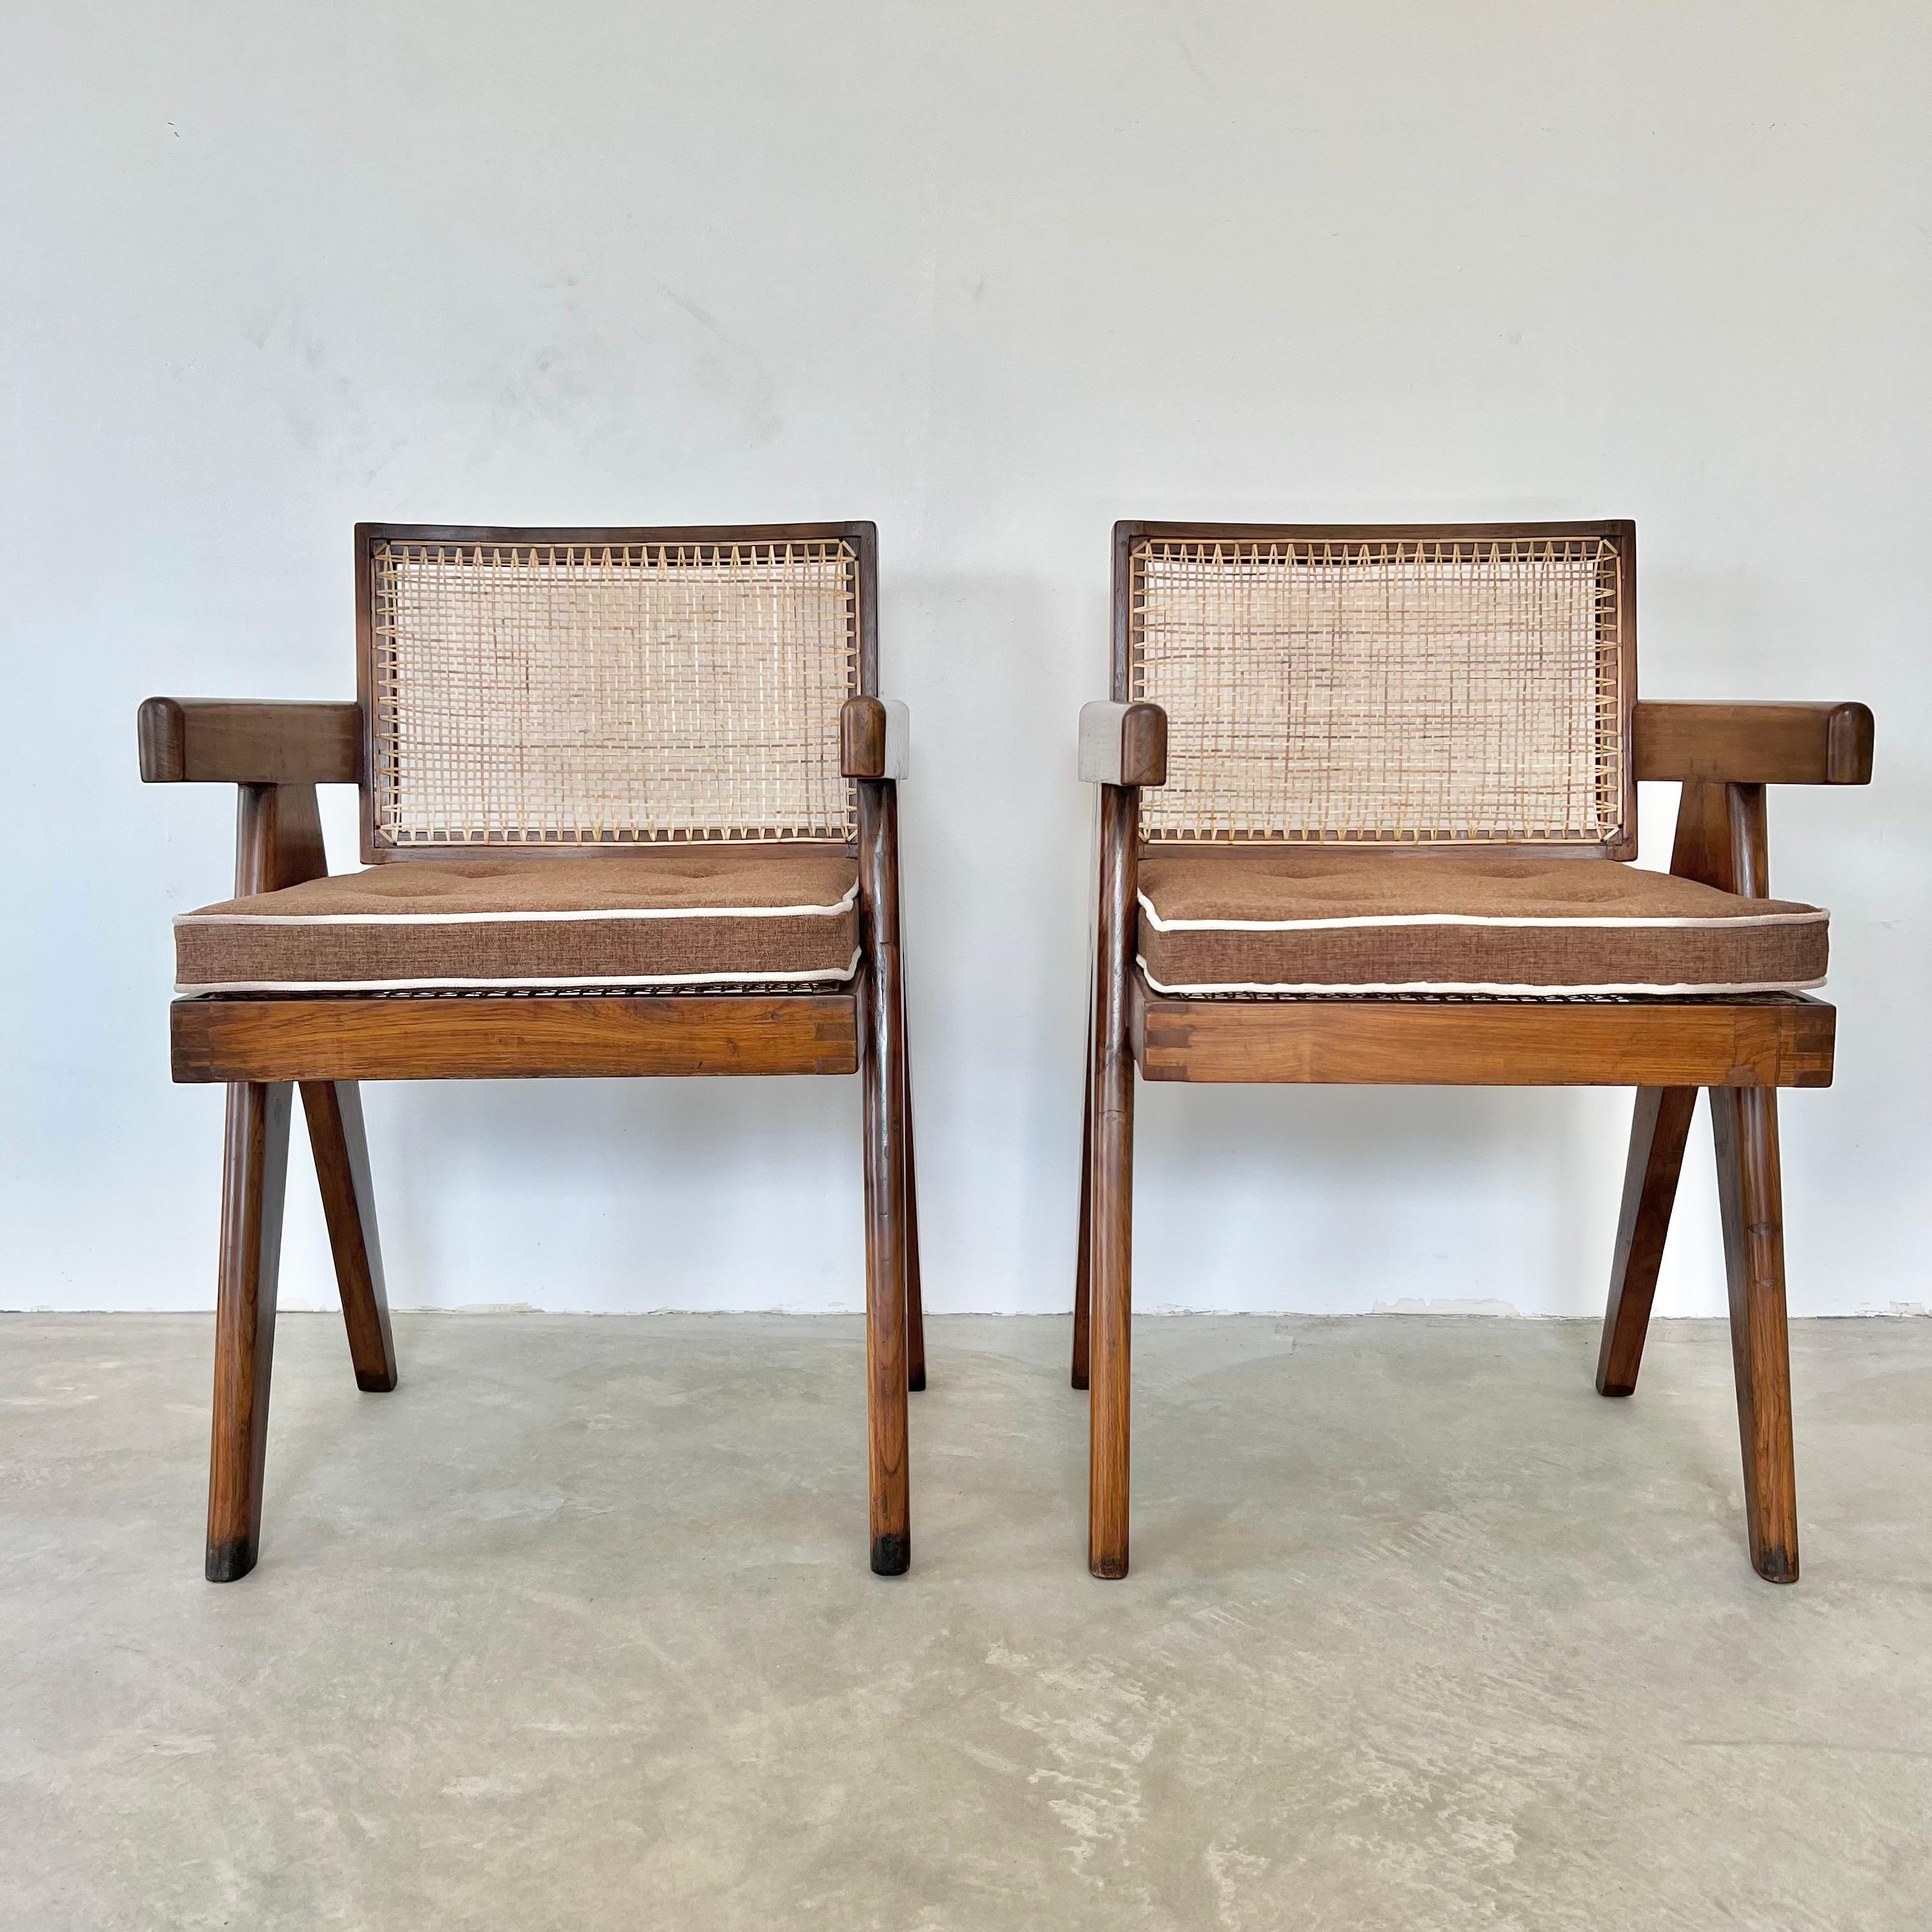 Fantastic collection of Pierre Jeanneret office chairs. Model PJ-0101-6S. Solid teak chairs with compass style legs, cane seat, and cane seat back. Slanted, slightly curved backrest. Hand stenciling on the back of both chairs reads : ASM, (L) -006